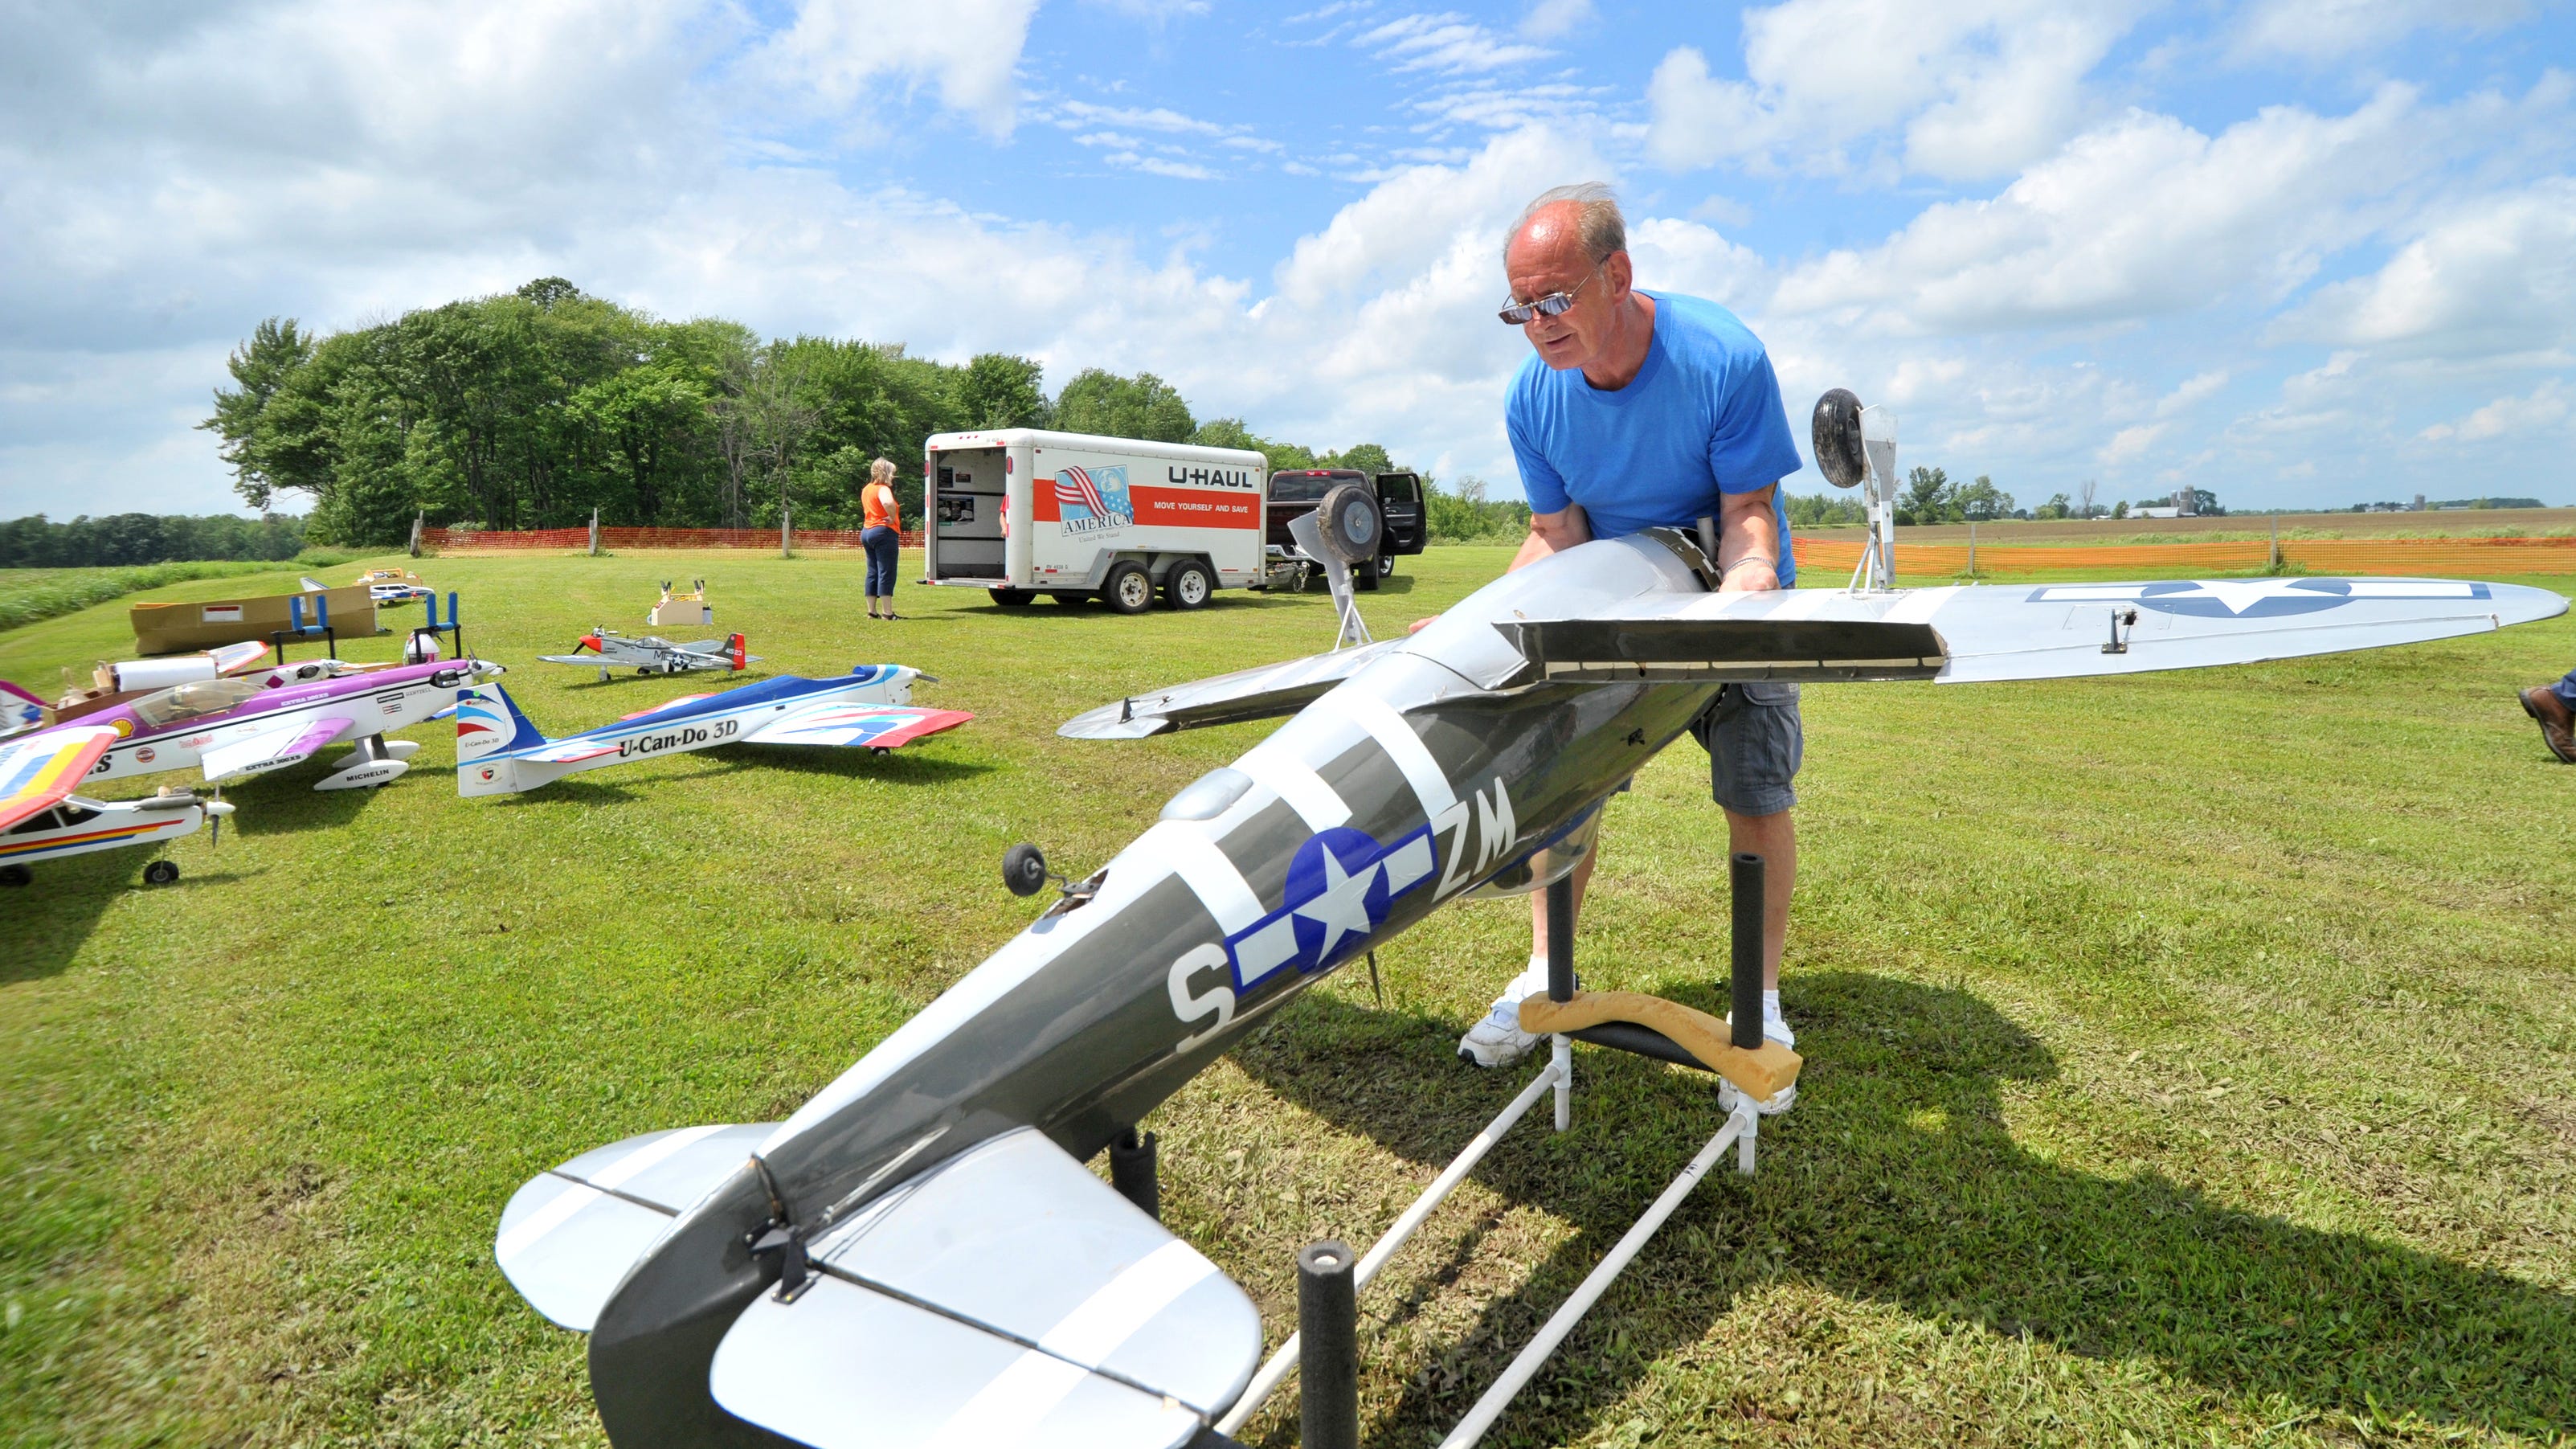 Radiocontrolled planes showcased at Fun Fly